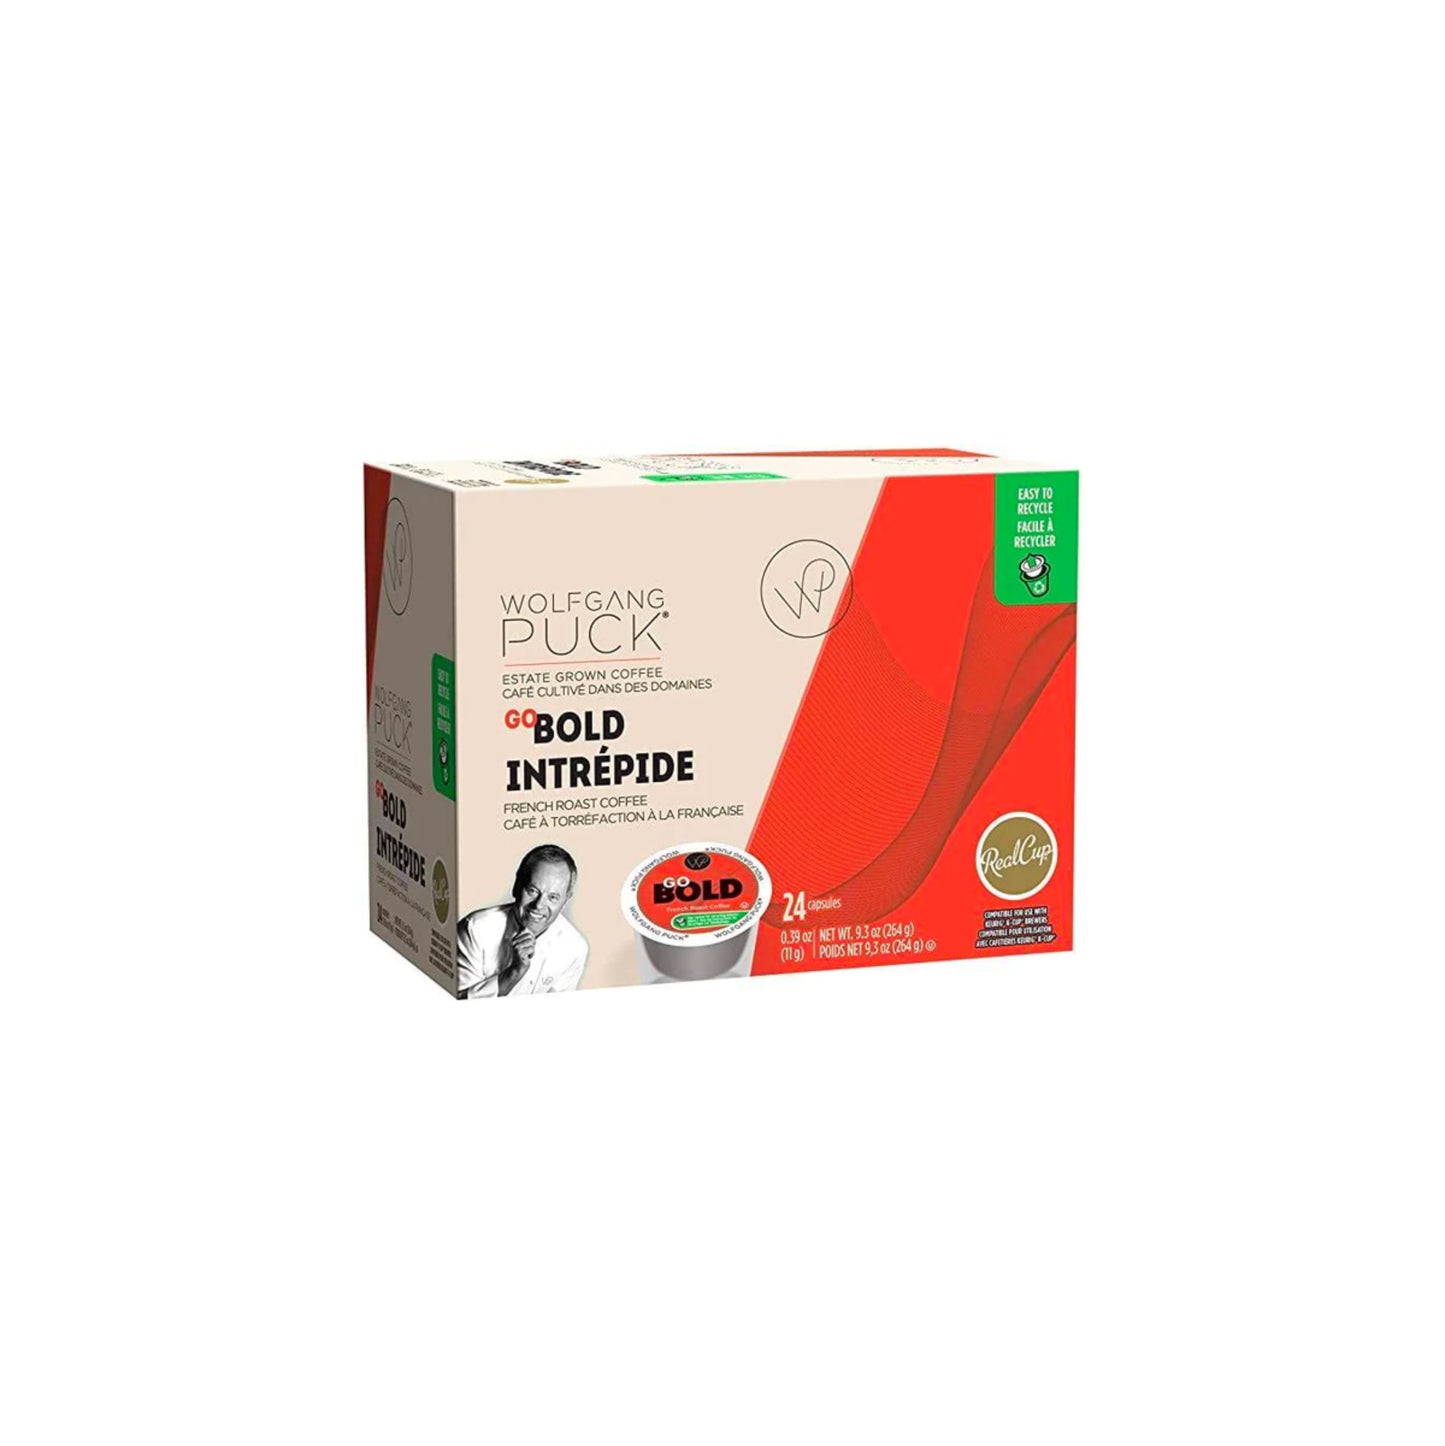 Wolfgang Puck Go Bold Single-Serve Coffee Pods